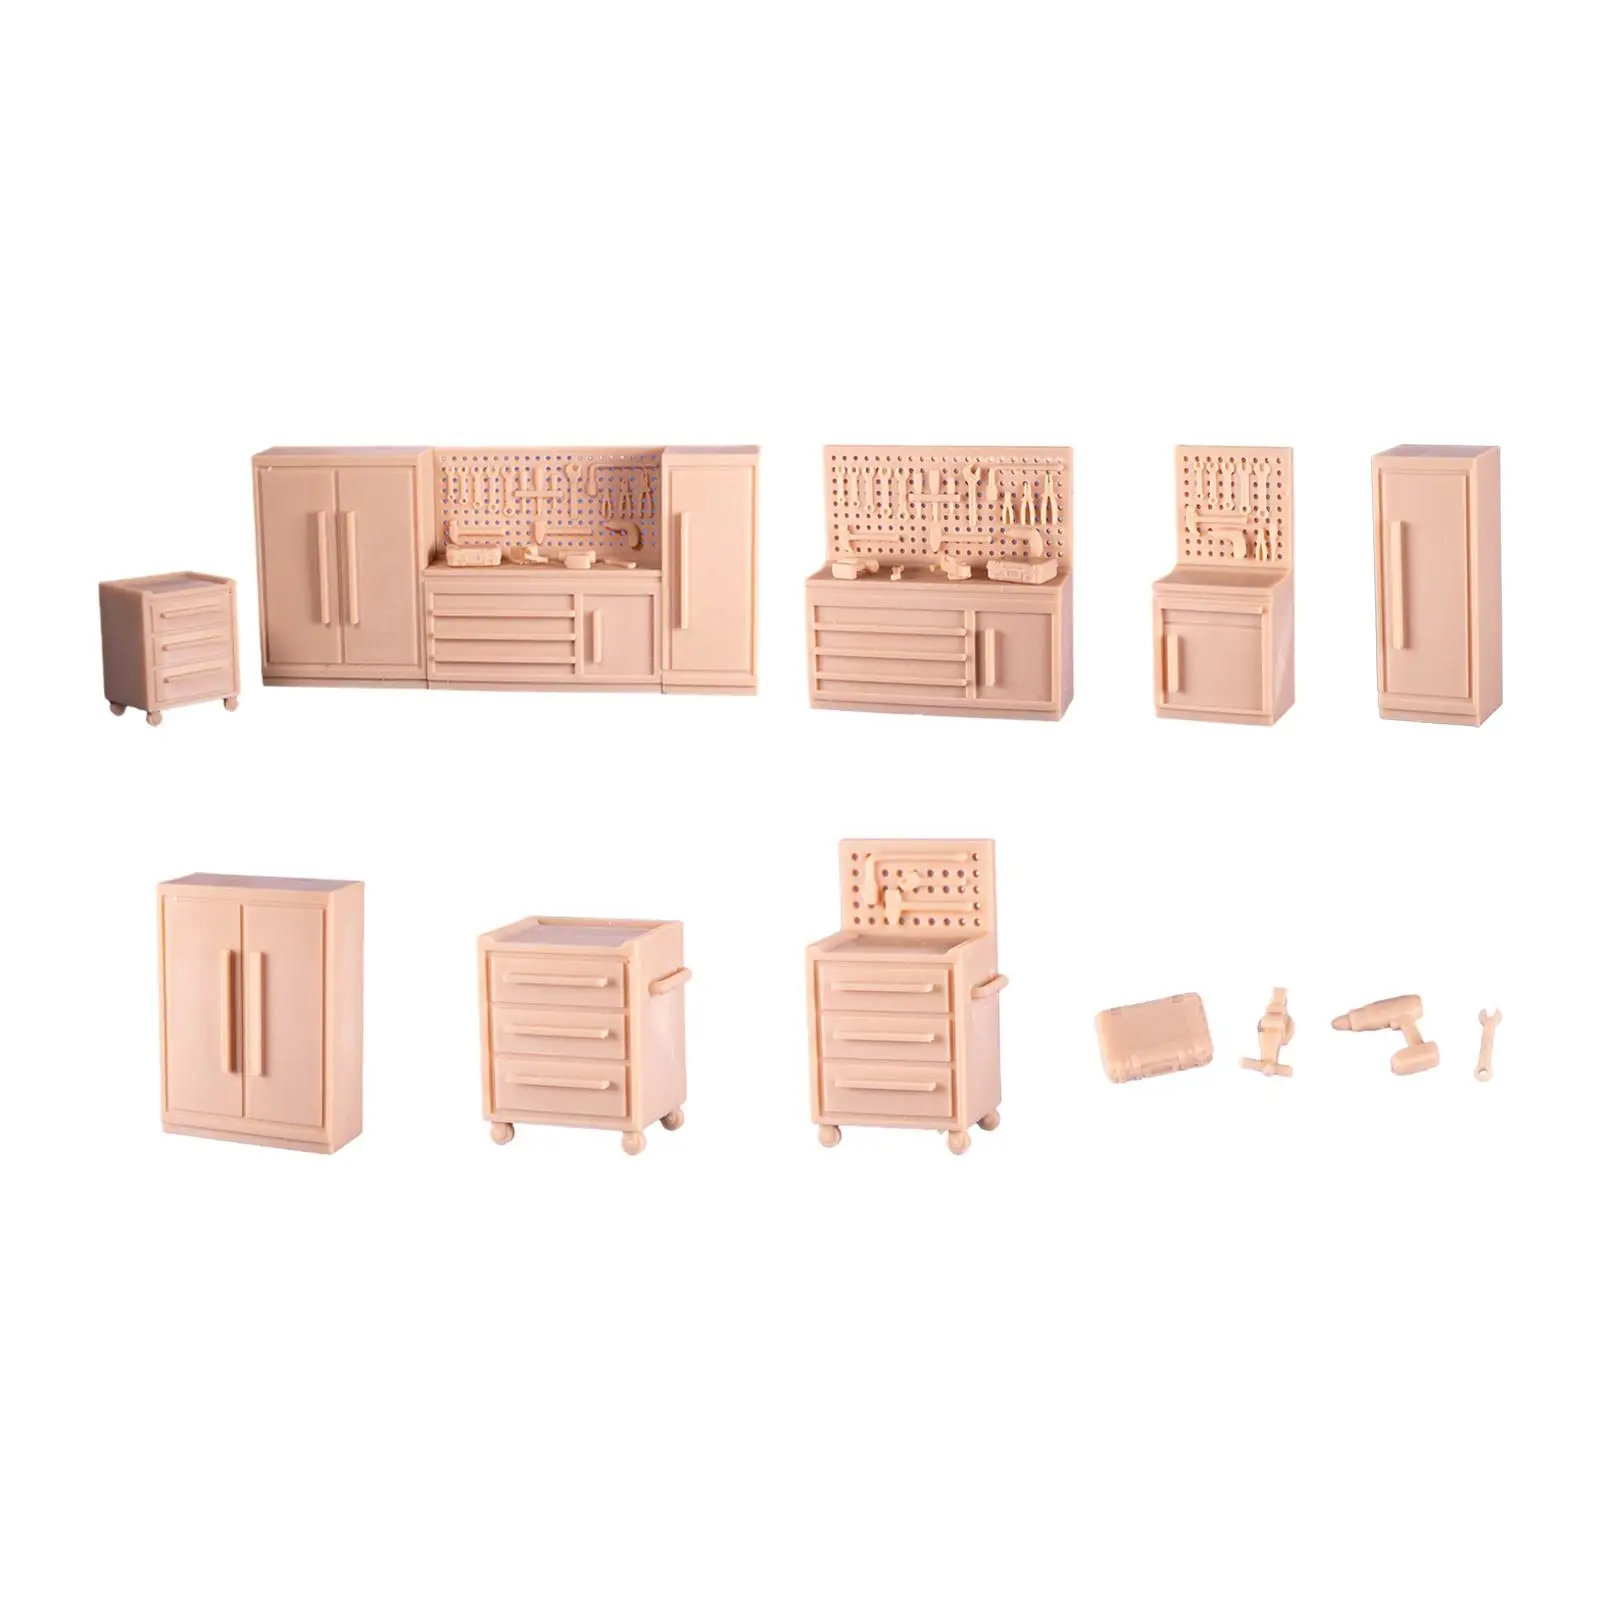 1/64 Cabinet Auto Repair Tool, Simulation Model Scene Accessories, Resin Tiny Model for DIY Sand Table, Garage Layout Model